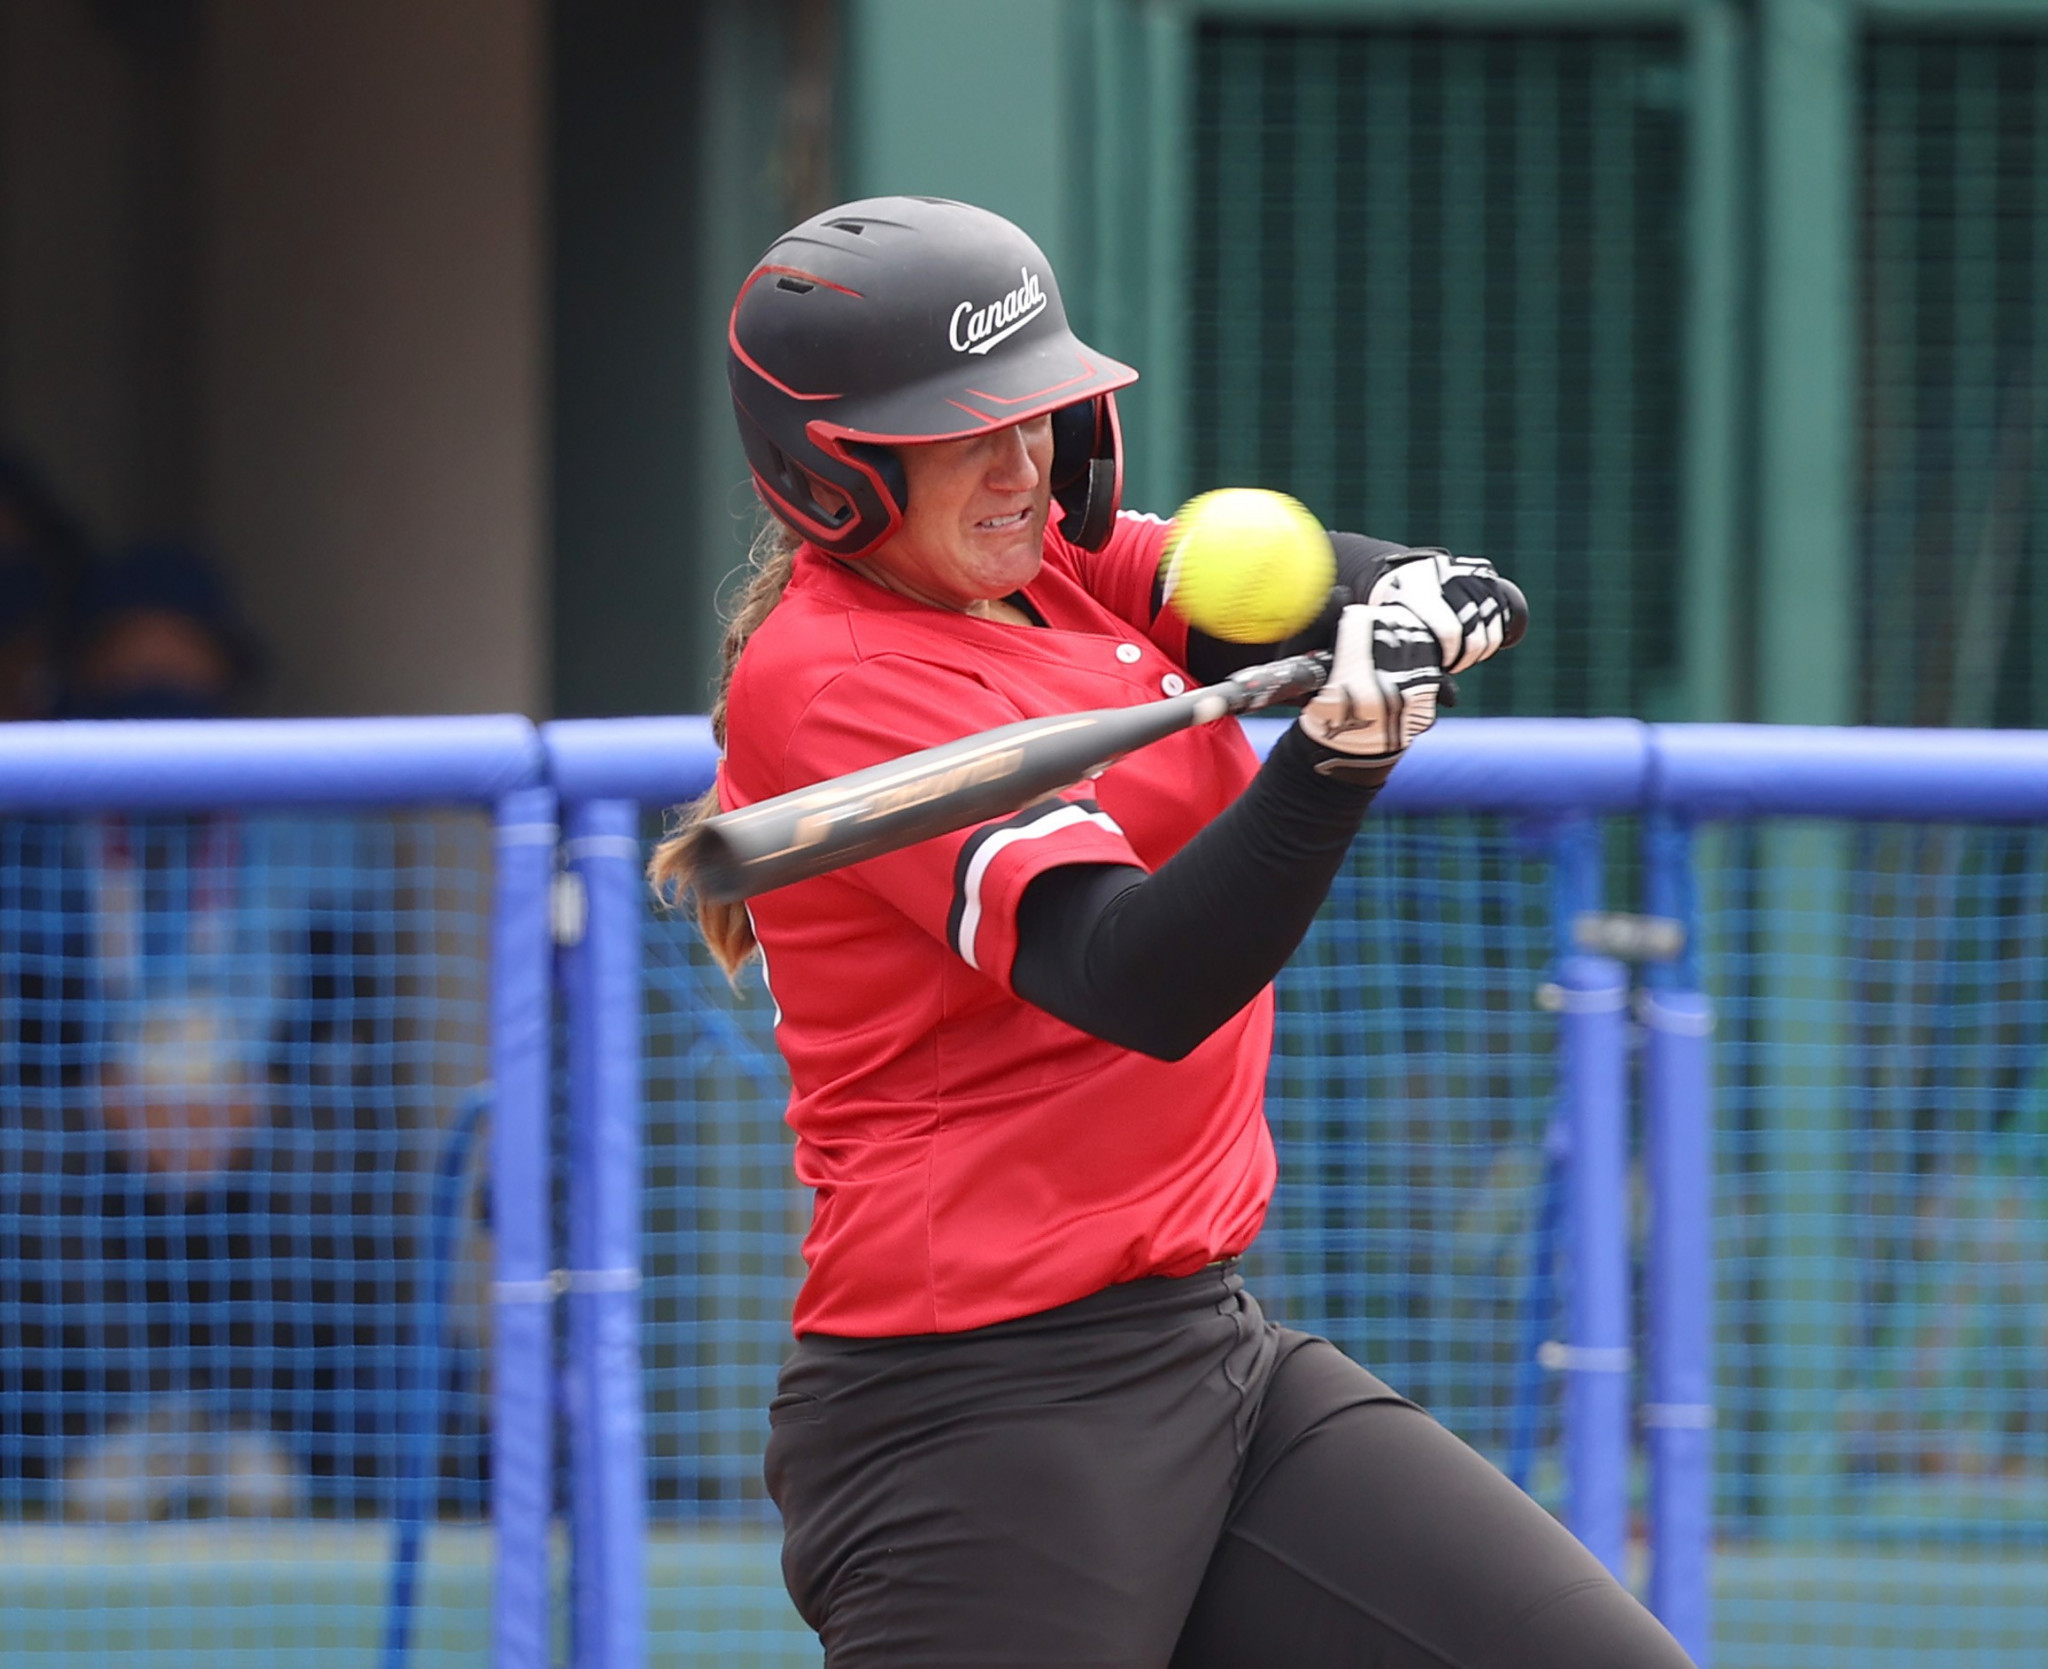 Kaleigh Rafter is the new head coach of the Canadian women's softball team ©Getty Images